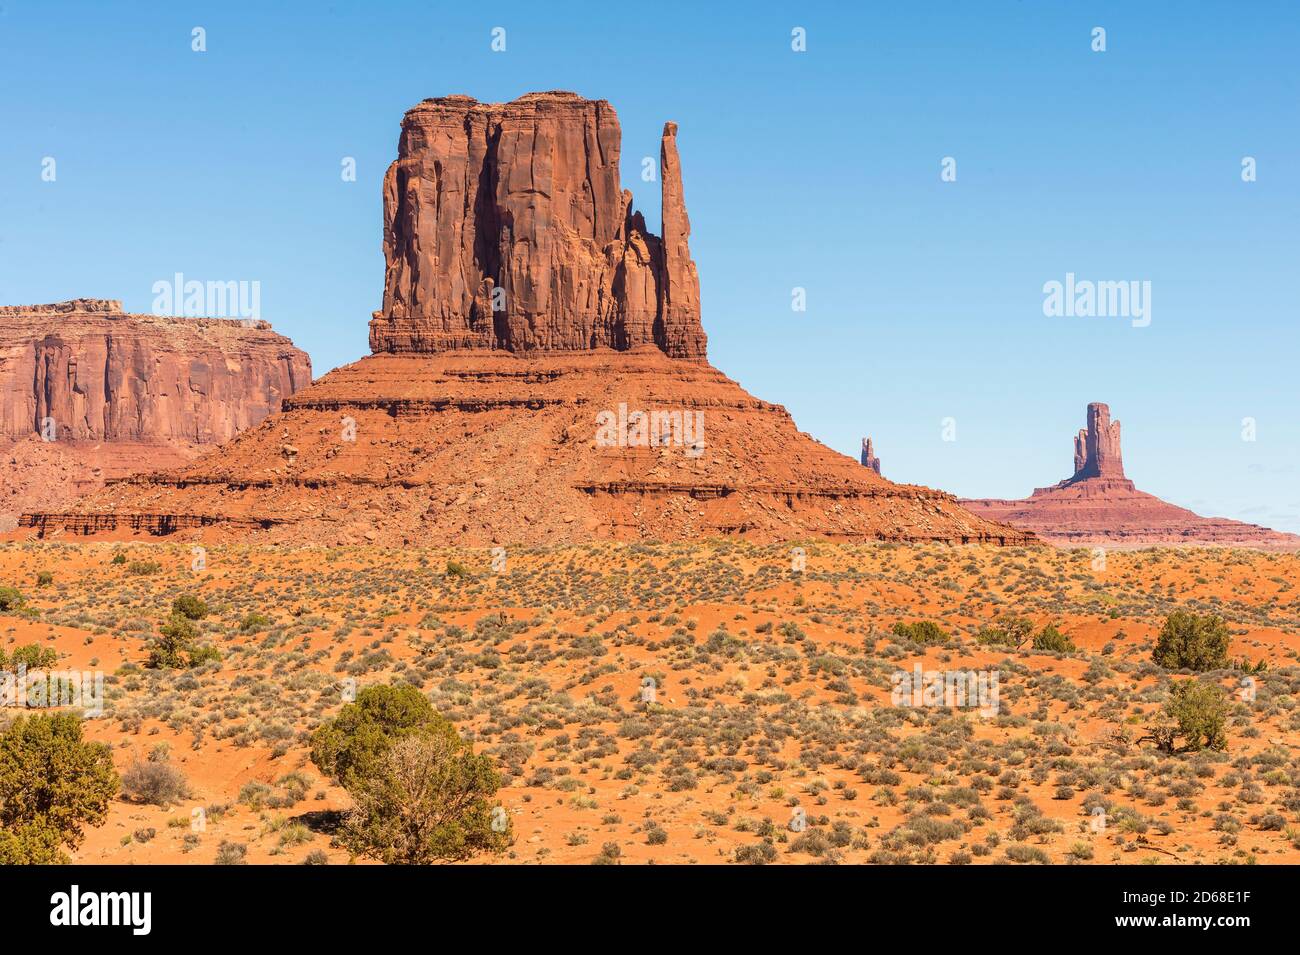 USA: the famous rock formations in Monument Valley, Arizona, typical landscape of the great American West Stock Photo